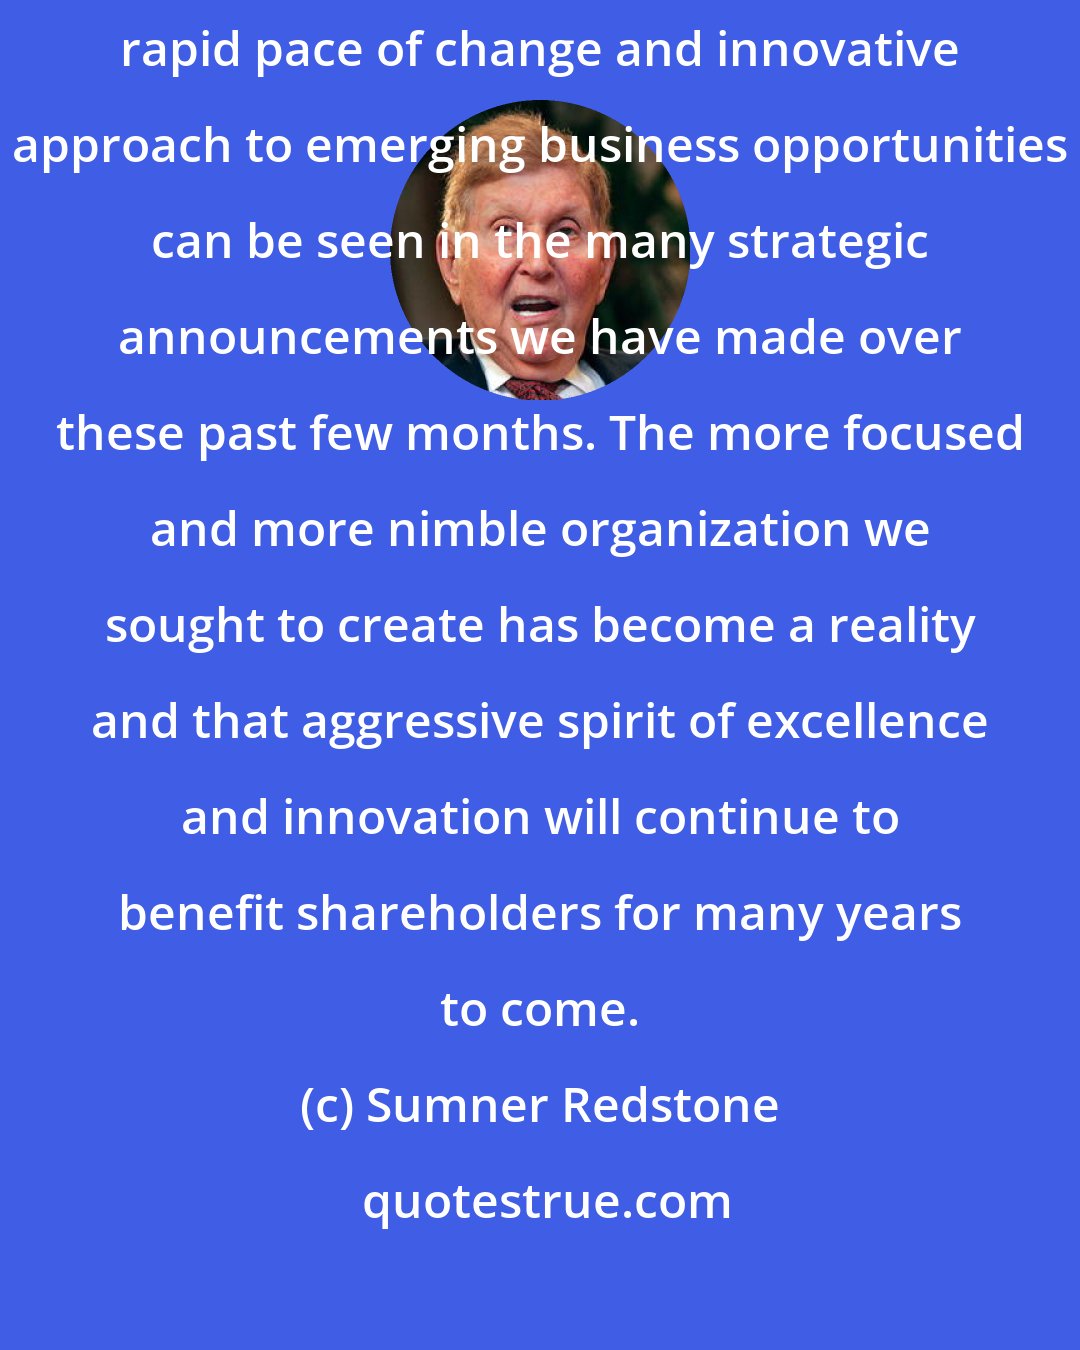 Sumner Redstone: I am very pleased with the progress of the new CBS Corporation. The Company's rapid pace of change and innovative approach to emerging business opportunities can be seen in the many strategic announcements we have made over these past few months. The more focused and more nimble organization we sought to create has become a reality and that aggressive spirit of excellence and innovation will continue to benefit shareholders for many years to come.